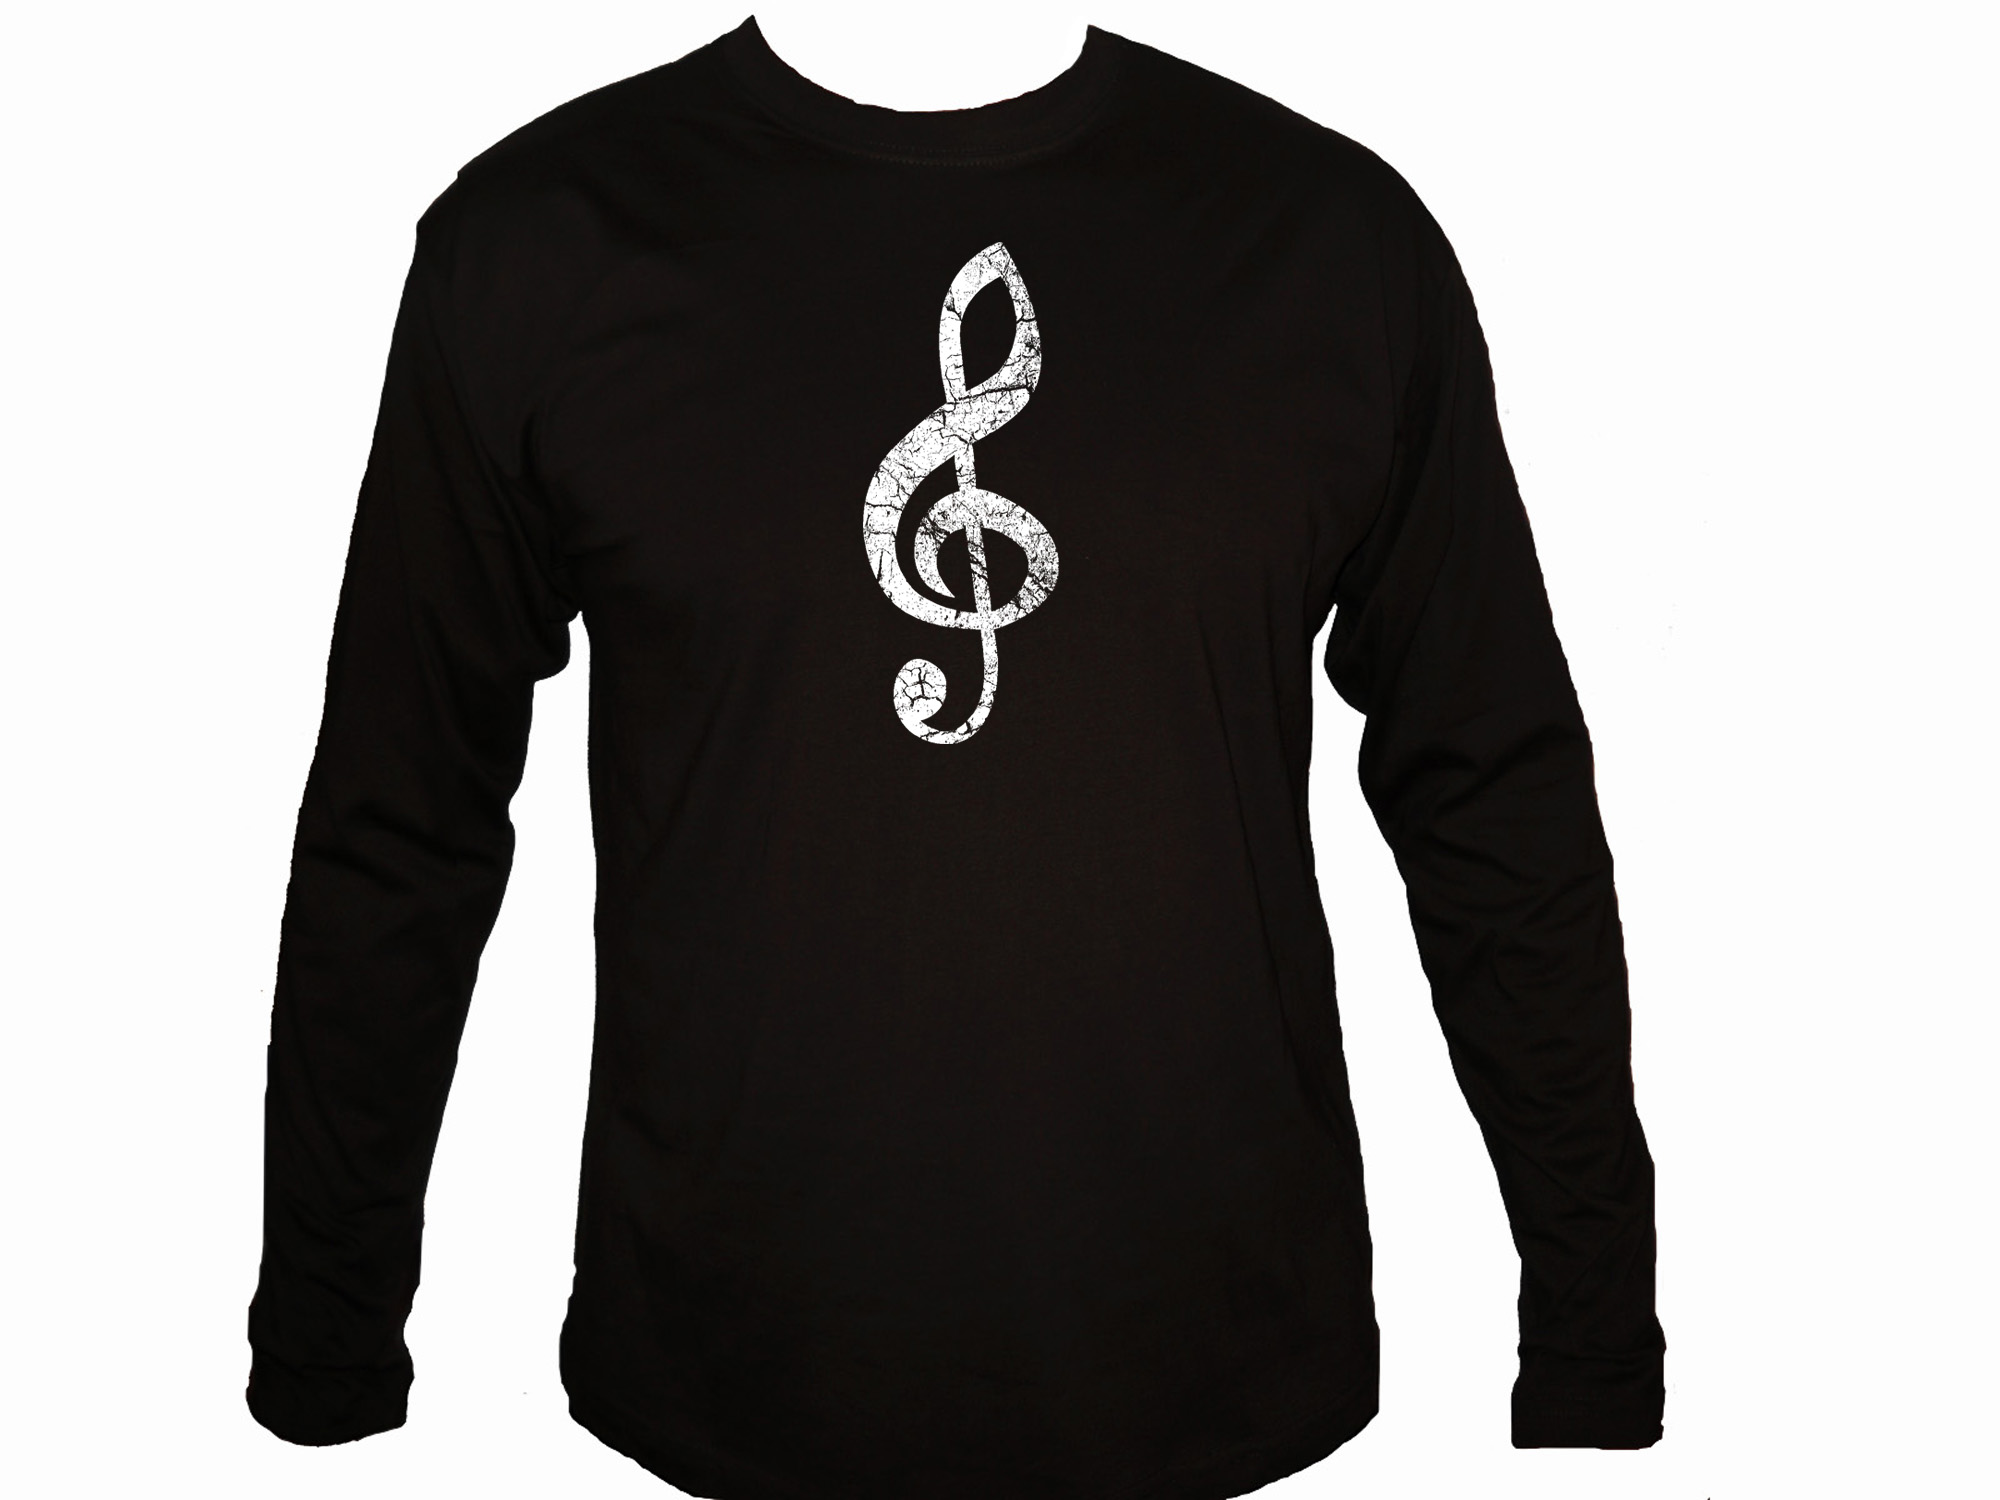 Musician player distressed treble clef sleeved t-shirt